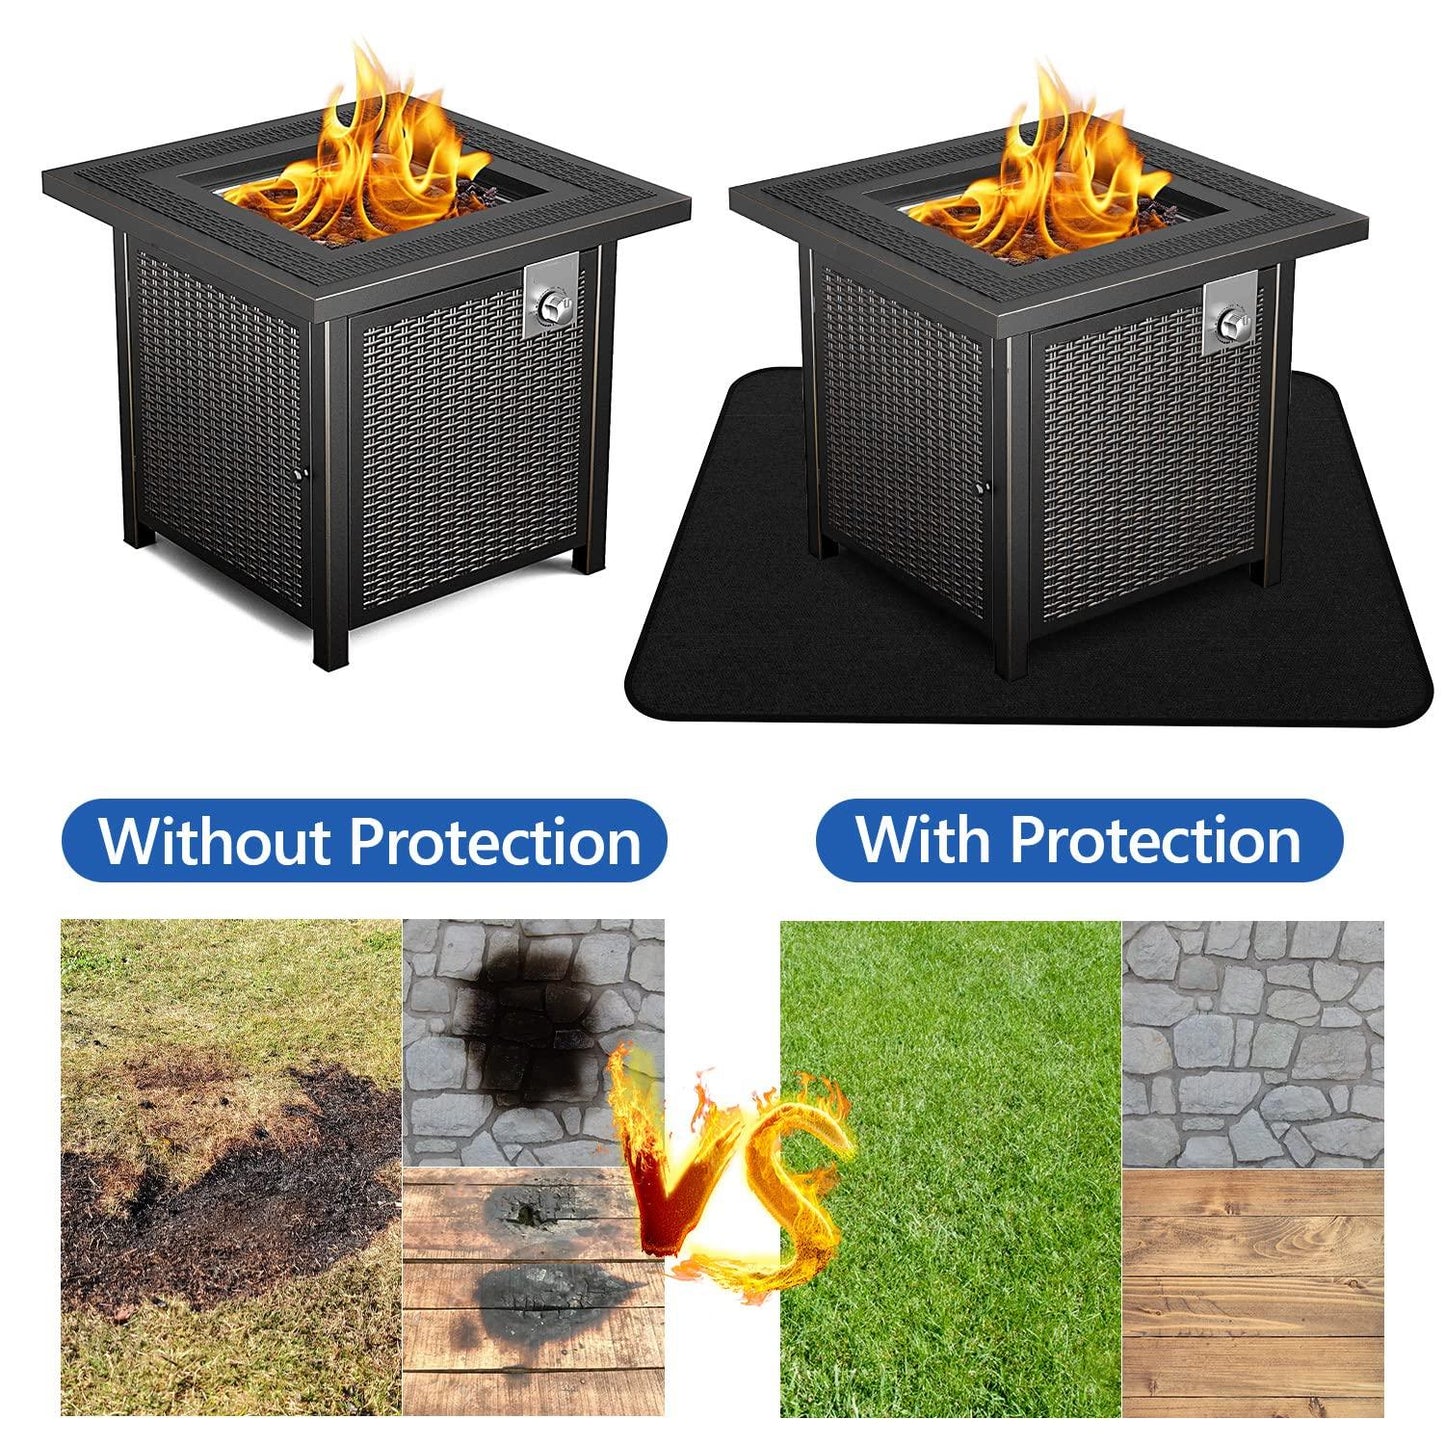 Under Grill Mat, 48×30 inches Deck and Patio Protective Mats, Double-Sided Fireproof Oil-Proof Grill Mats for Outdoor Grill, Fireproof Grill Pads for Outdoor Charcoal, Flat Top, Smokers, Gas Grills - CookCave